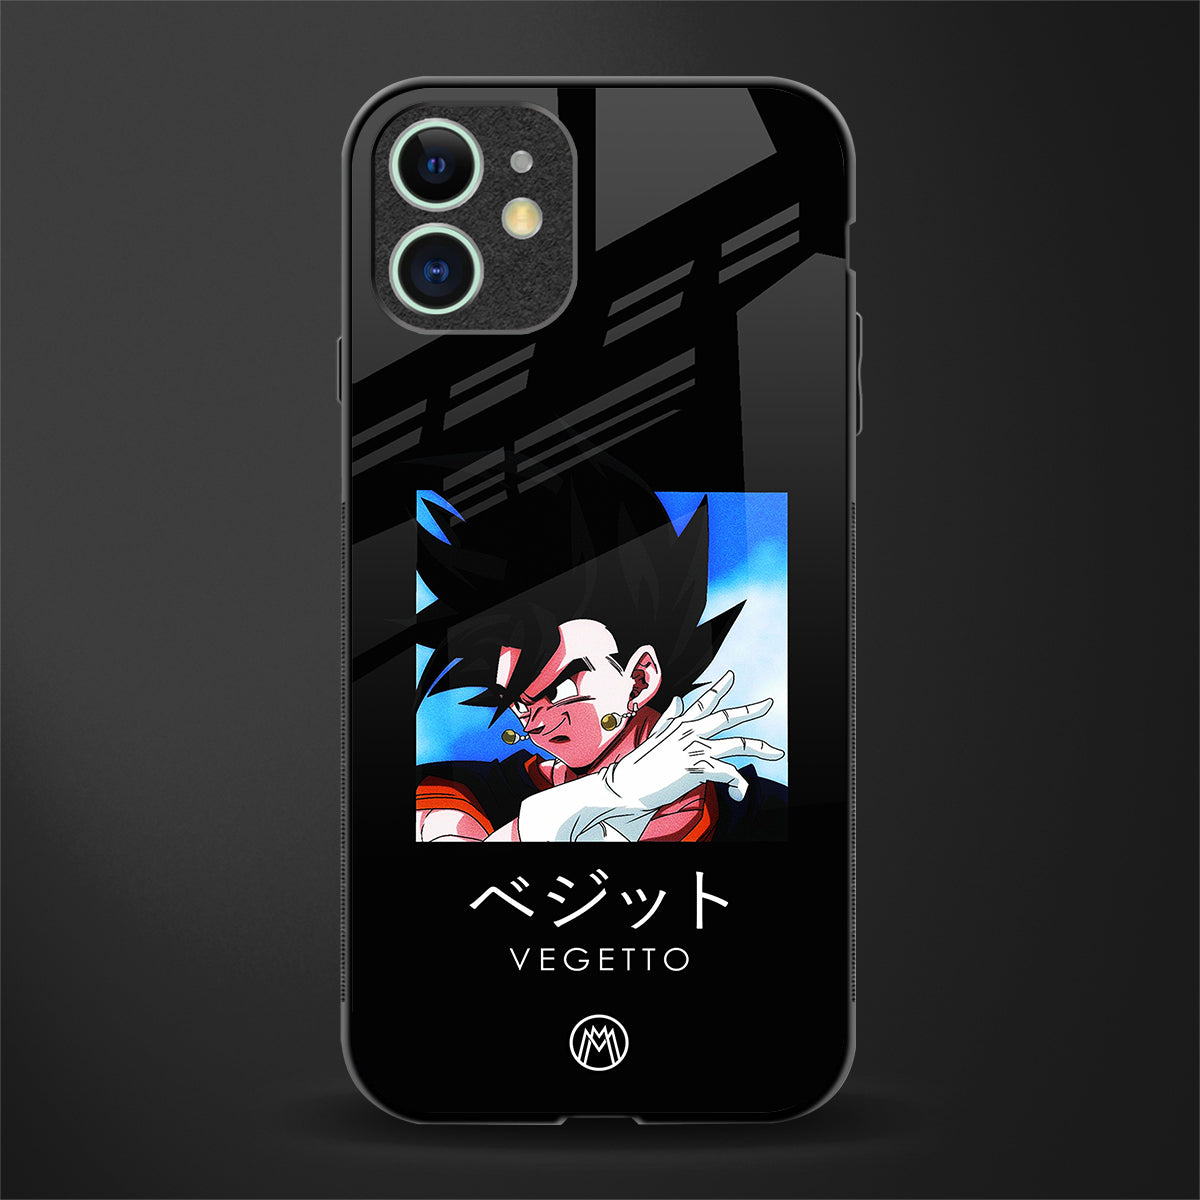 vegetto dragon ball z anime glass case for iphone 12 mini image